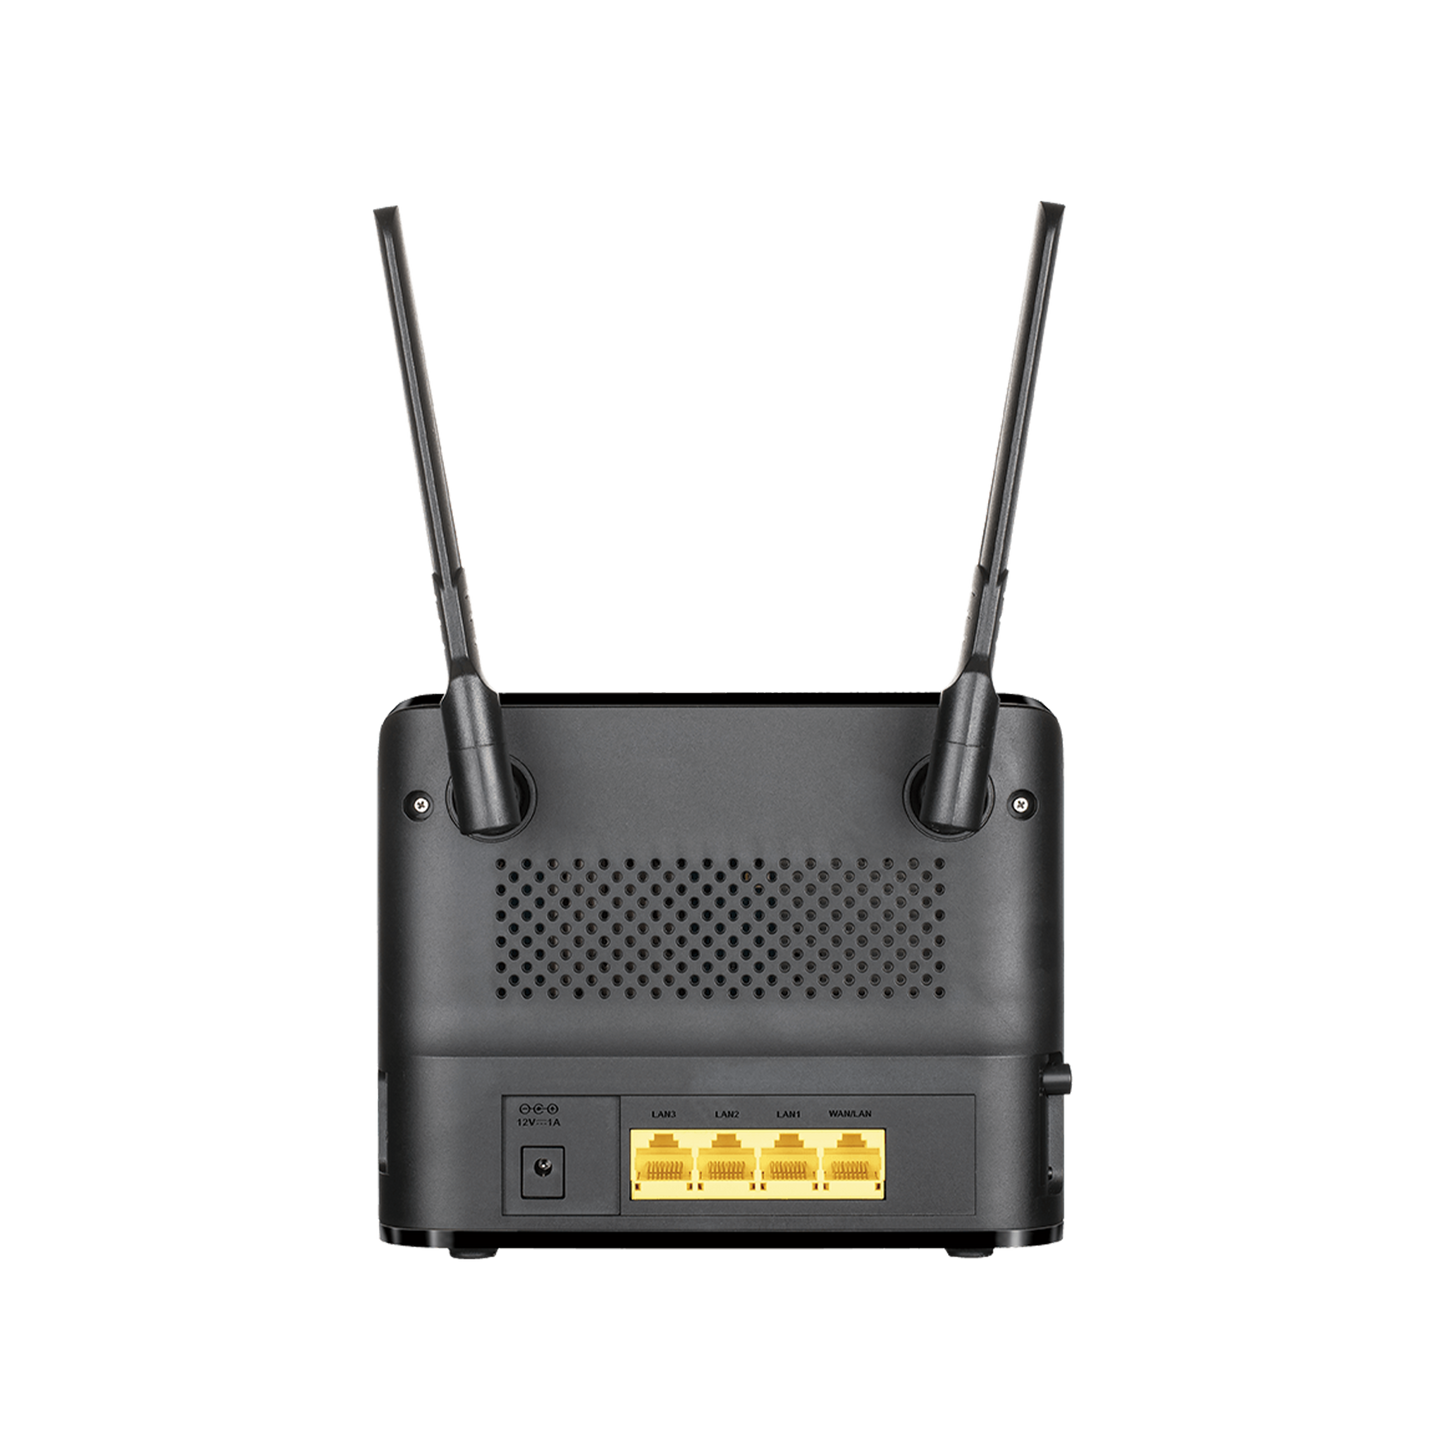 AC1200 4G LTE Cat4 WiFi Mobile Router | DWR-953v2